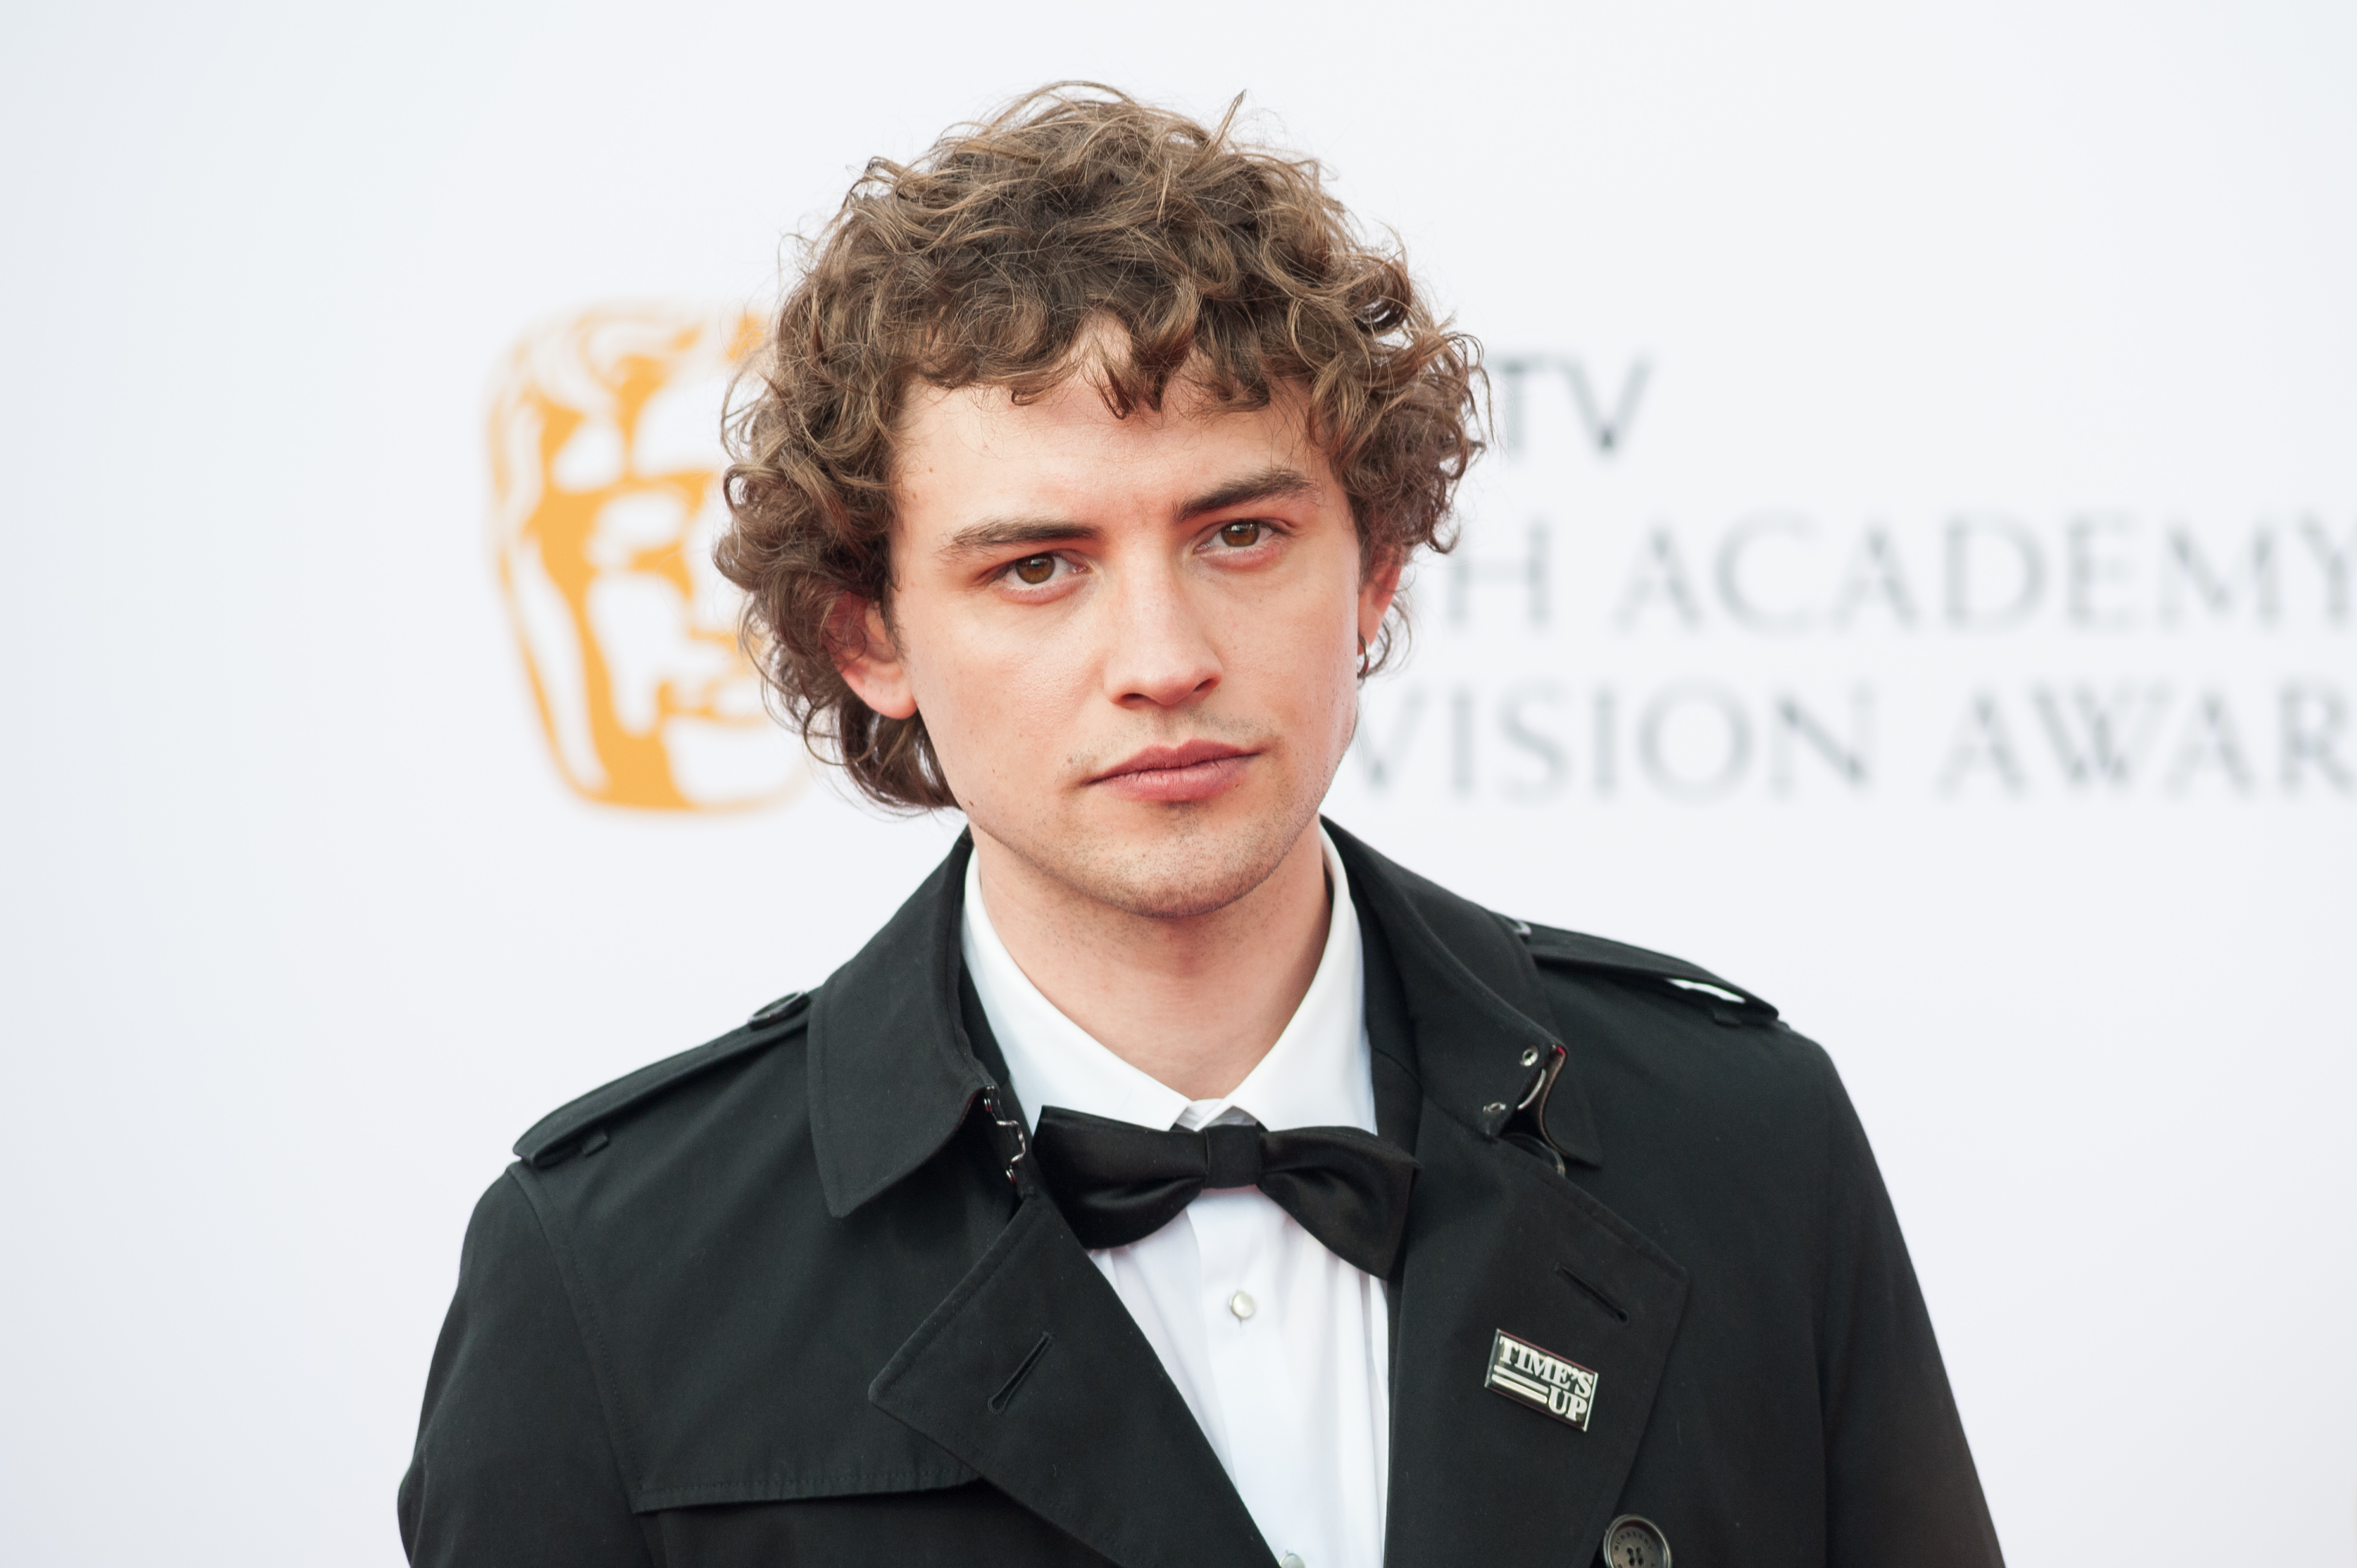 Josh Whitehouse attends the Virgin TV British Academy Television Awards ceremony at the Royal Festival Hall on May 13, 2018 in London, United Kingdom. (Barcroft Media via Getty Images)